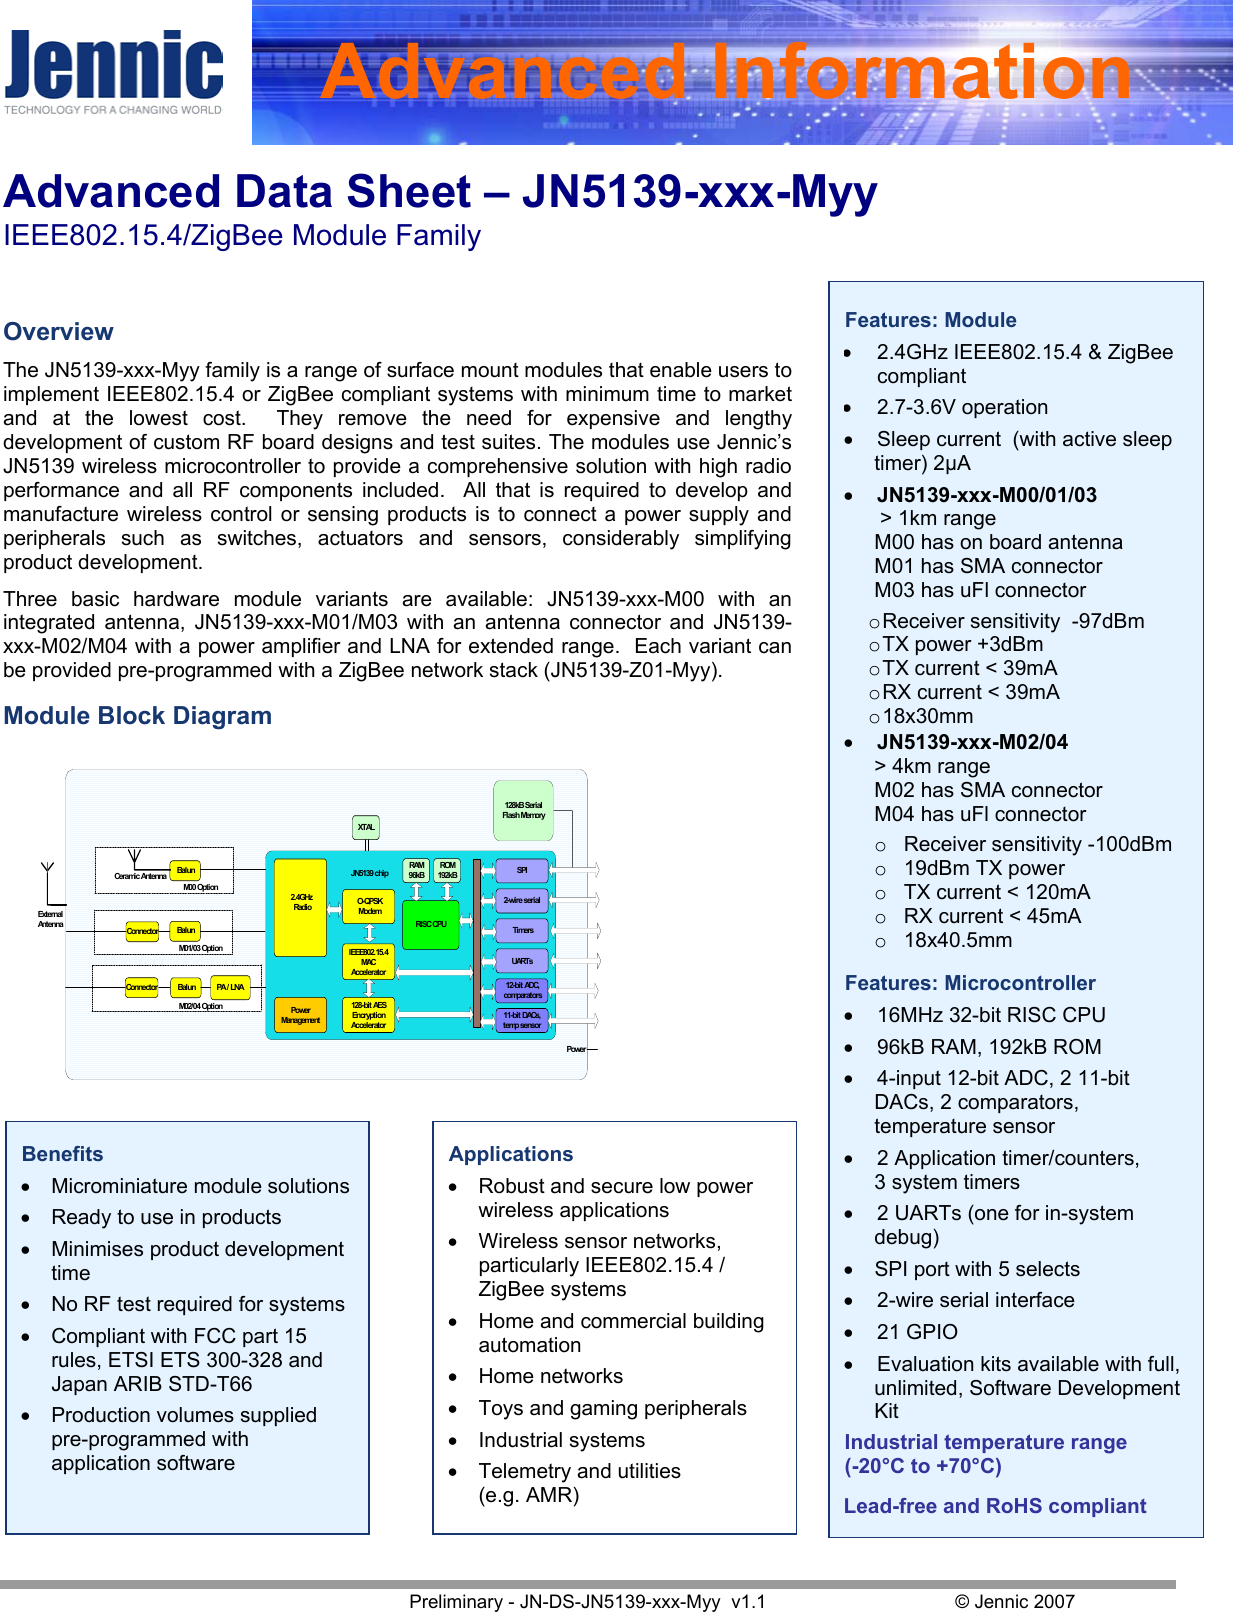 Advanced Data Sheet – JN5139-xxx-Myy  IEEE802.15.4/ZigBee Module Family   Preliminary - JN-DS-JN5139-xxx-Myy  v1.1  © Jennic 2007 Advanced InformationFeatures: Module • 2.4GHz IEEE802.15.4 &amp; ZigBee compliant • 2.7-3.6V operation • Sleep current  (with active sleep timer) 2µA • JN5139-xxx-M00/01/03  &gt; 1km range M00 has on board antenna  M01 has SMA connector  M03 has uFl connector  o Receiver sensitivity  -97dBm o TX power +3dBm o TX current &lt; 39mA  o RX current &lt; 39mA o 18x30mm • JN5139-xxx-M02/04   &gt; 4km range M02 has SMA connector  M04 has uFl connector o  Receiver sensitivity -100dBm o  19dBm TX power o  TX current &lt; 120mA  o  RX current &lt; 45mA o  18x40.5mm  Features: Microcontroller • 16MHz 32-bit RISC CPU • 96kB RAM, 192kB ROM • 4-input 12-bit ADC, 2 11-bit DACs, 2 comparators, temperature sensor • 2 Application timer/counters,  3 system timers • 2 UARTs (one for in-system debug) • SPI port with 5 selects • 2-wire serial interface • 21 GPIO • Evaluation kits available with full, unlimited, Software Development Kit Industrial temperature range (-20°C to +70°C)  Lead-free and RoHS compliant   Overview The JN5139-xxx-Myy family is a range of surface mount modules that enable users to implement IEEE802.15.4 or ZigBee compliant systems with minimum time to market and at the lowest cost.  They remove the need for expensive and lengthy development of custom RF board designs and test suites. The modules use Jennic’s JN5139 wireless microcontroller to provide a comprehensive solution with high radio performance and all RF components included.  All that is required to develop and manufacture wireless control or sensing products is to connect a power supply and peripherals such as switches, actuators and sensors, considerably simplifying product development. Three basic hardware module variants are available: JN5139-xxx-M00 with an integrated antenna, JN5139-xxx-M01/M03 with an antenna connector and JN5139-xxx-M02/M04 with a power amplifier and LNA for extended range.  Each variant can be provided pre-programmed with a ZigBee network stack (JN5139-Z01-Myy). Module Block Diagram     Benefits • Microminiature module solutions • Ready to use in products • Minimises product development time • No RF test required for systems • Compliant with FCC part 15 rules, ETSI ETS 300-328 and Japan ARIB STD-T66 • Production volumes supplied pre-programmed with application software Applications • Robust and secure low power wireless applications • Wireless sensor networks, particularly IEEE802.15.4 / ZigBee systems • Home and commercial building automation • Home networks • Toys and gaming peripherals • Industrial systems • Telemetry and utilities (e.g. AMR) TimersUARTs12-bit ADC,comparators11- bi t DACs,temp sensor2-wire seri alSPIRAM96kB128-bi t AESEncrypt i onAccelerator2.4GHz Radi oROM192kBRI SC CPUPowerManagementXTALO- QPS KModemIEEE802.15.4MACAccelerator128kB SerialFlash MemoryJN5139 chipPowerBal unConnectorBal unCeramic AntennaBal unConnector PA / LNAExt er nalAnt e nnaM00 Opti onM01/03 Opti onM02/04 Opti on